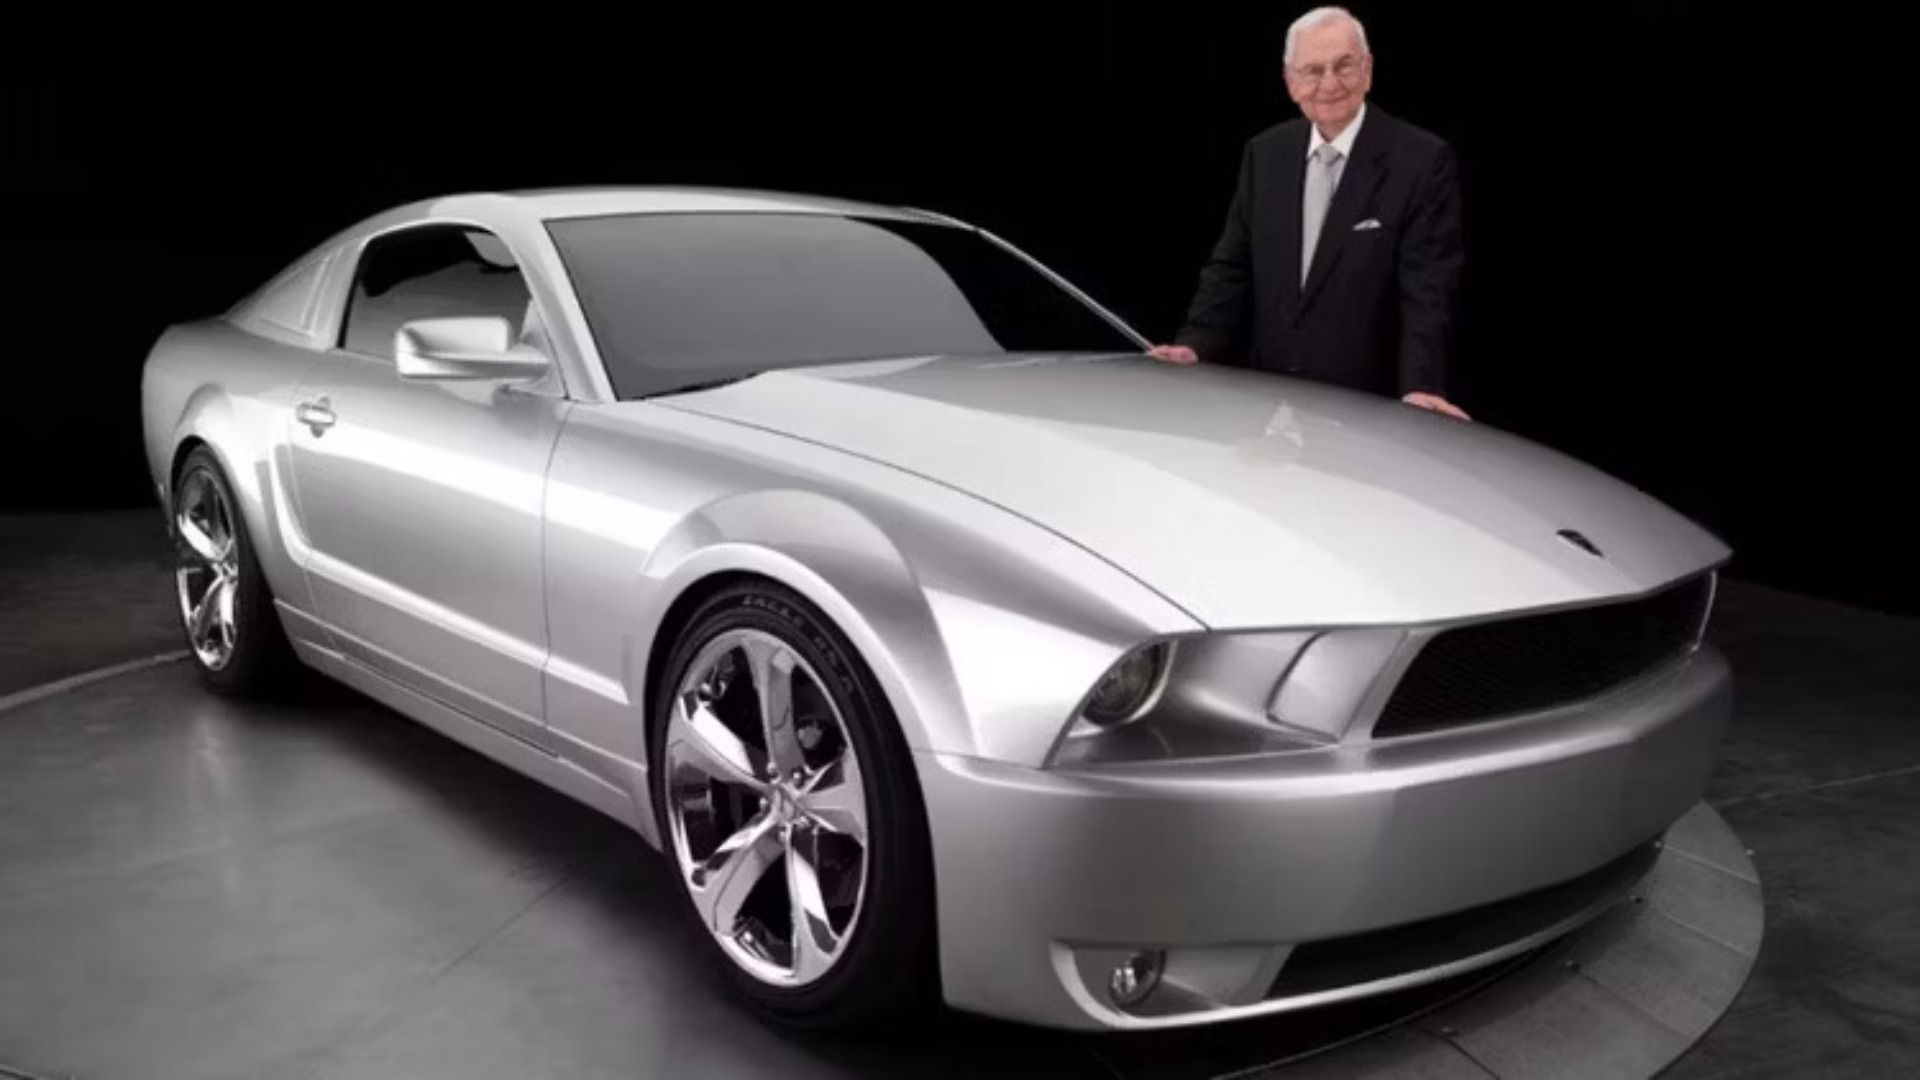 Lee Iacocca standing next to the 2009 Ford Mustang Iacocca Edition he designed